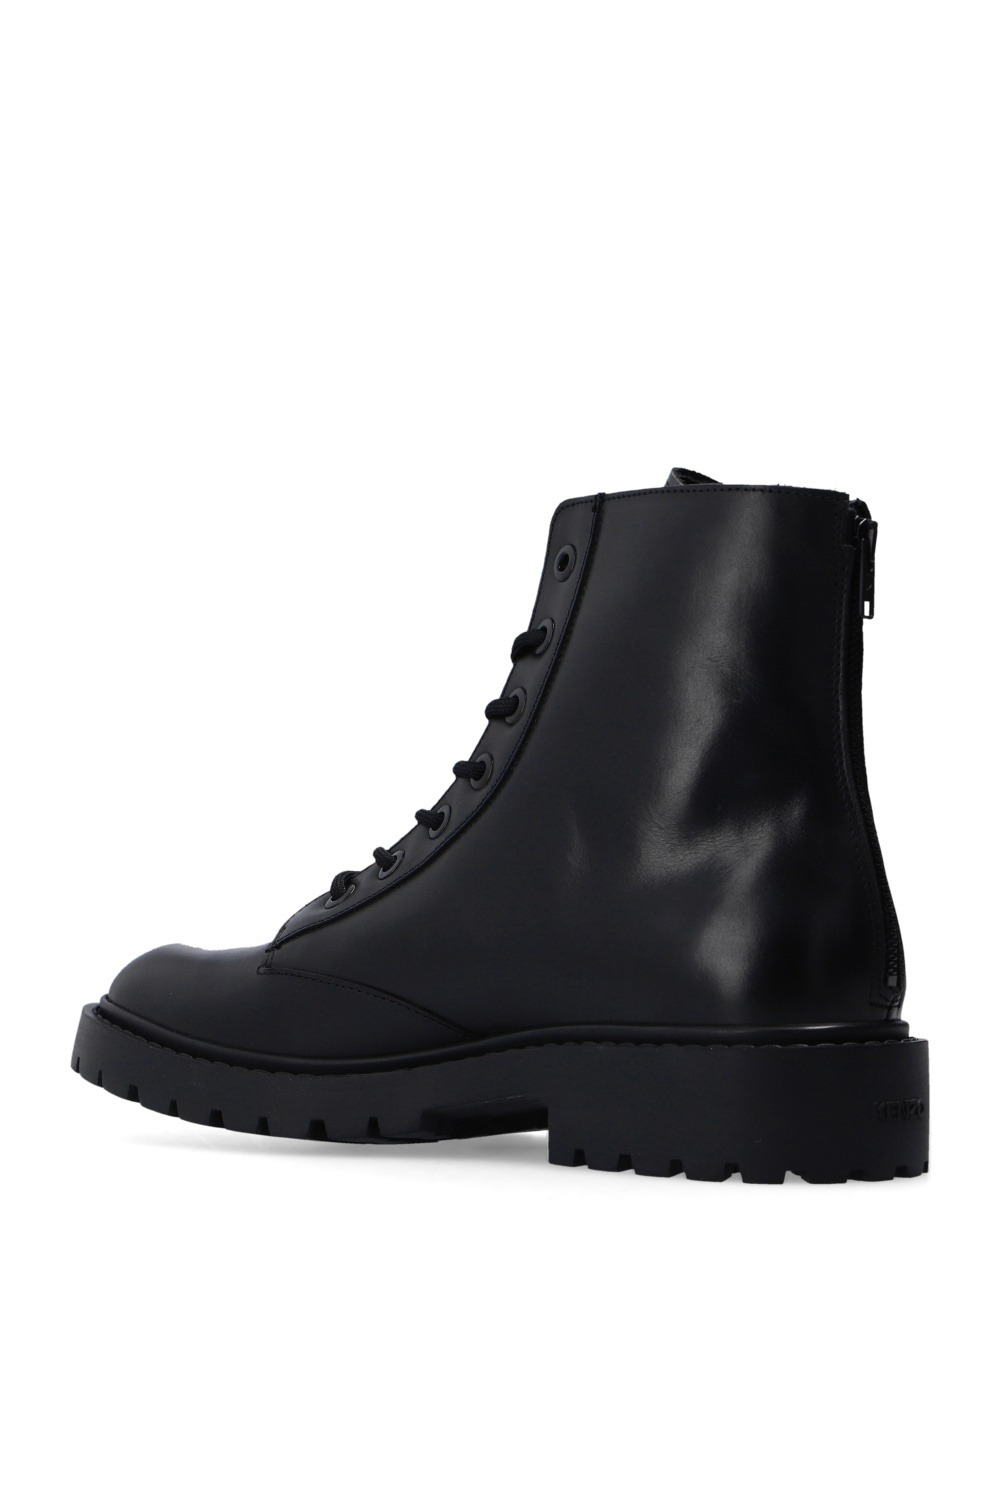 Kenzo ‘Pike’ leather ankle boots